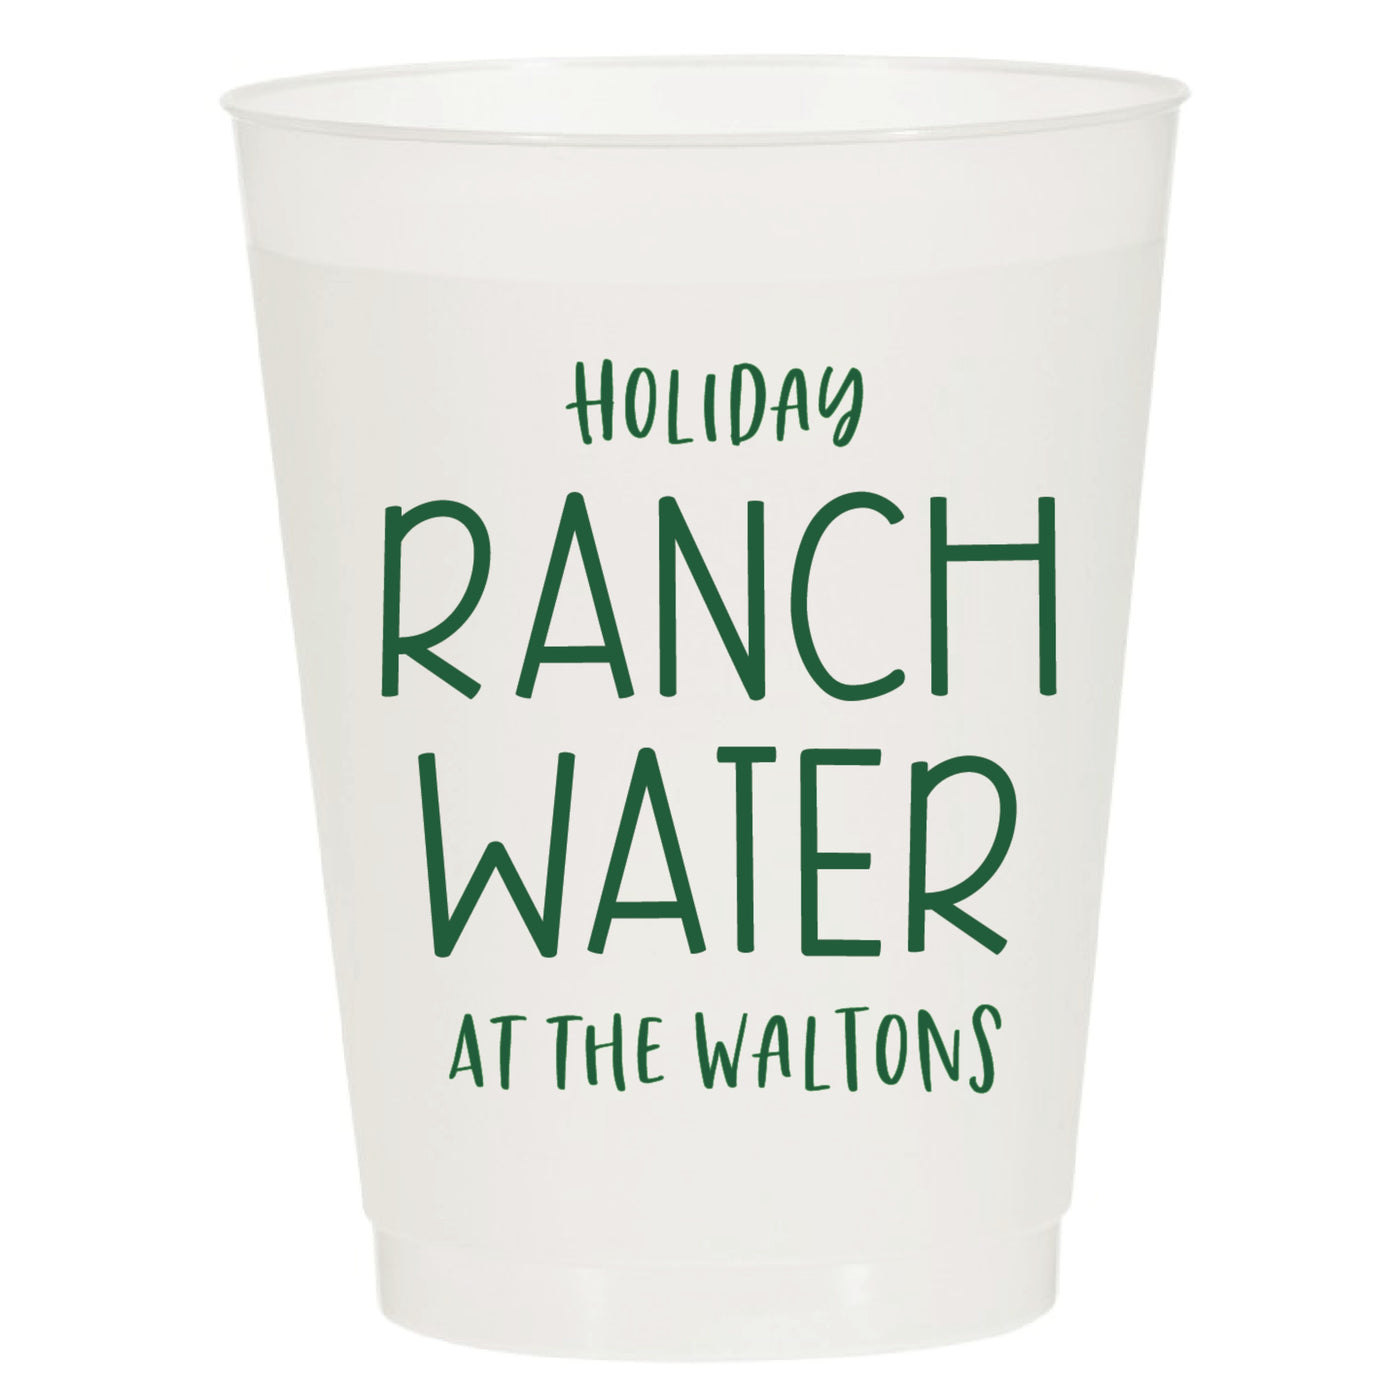 At Home Collection | Holiday Ranch Water Frosted Cups